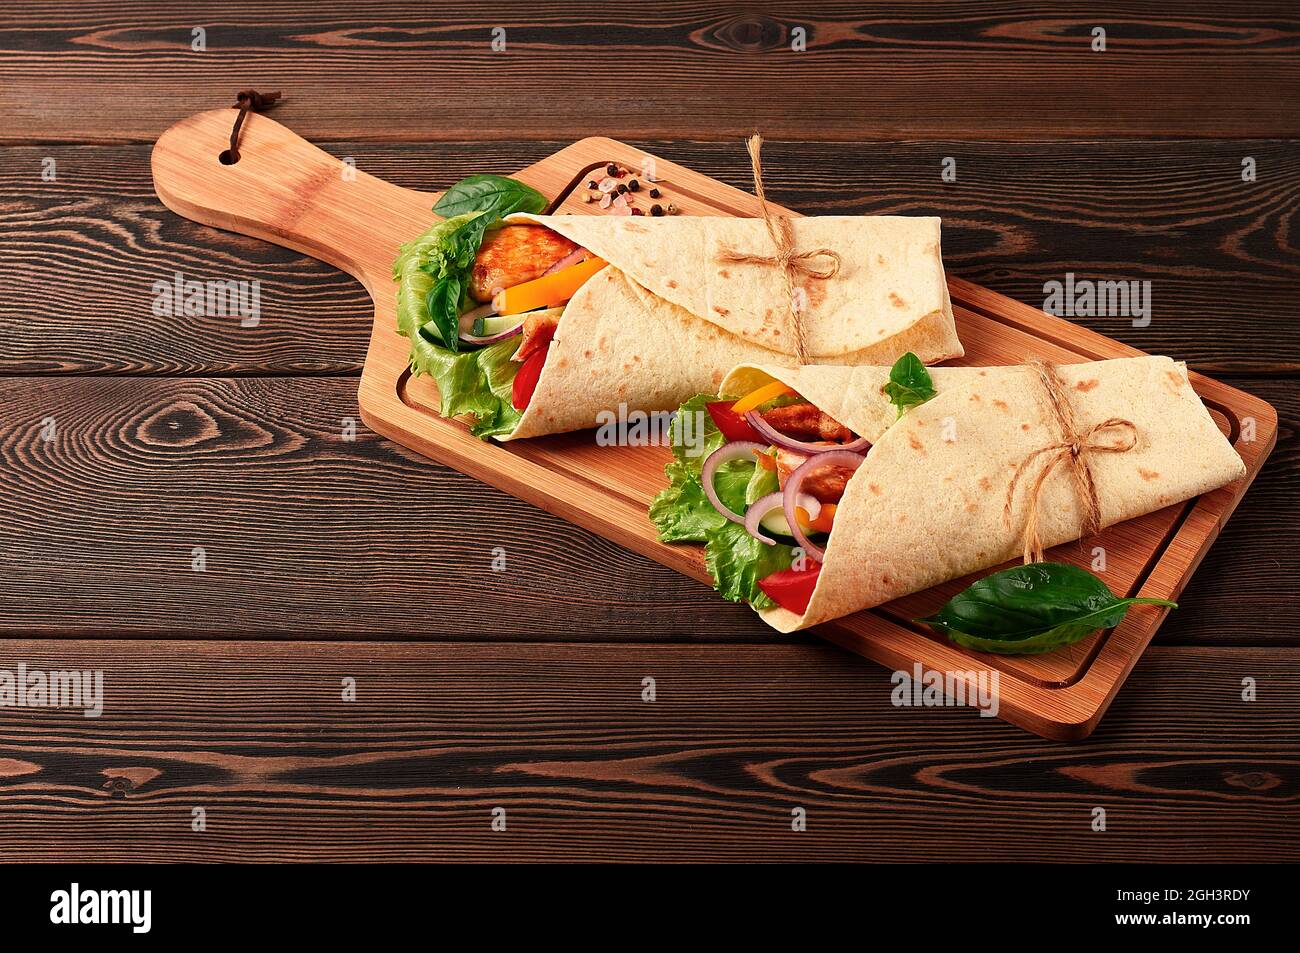 Tortilla wraps, grilled Mexican chicken with vegetables, burritos, on a wooden table, without people, Stock Photo